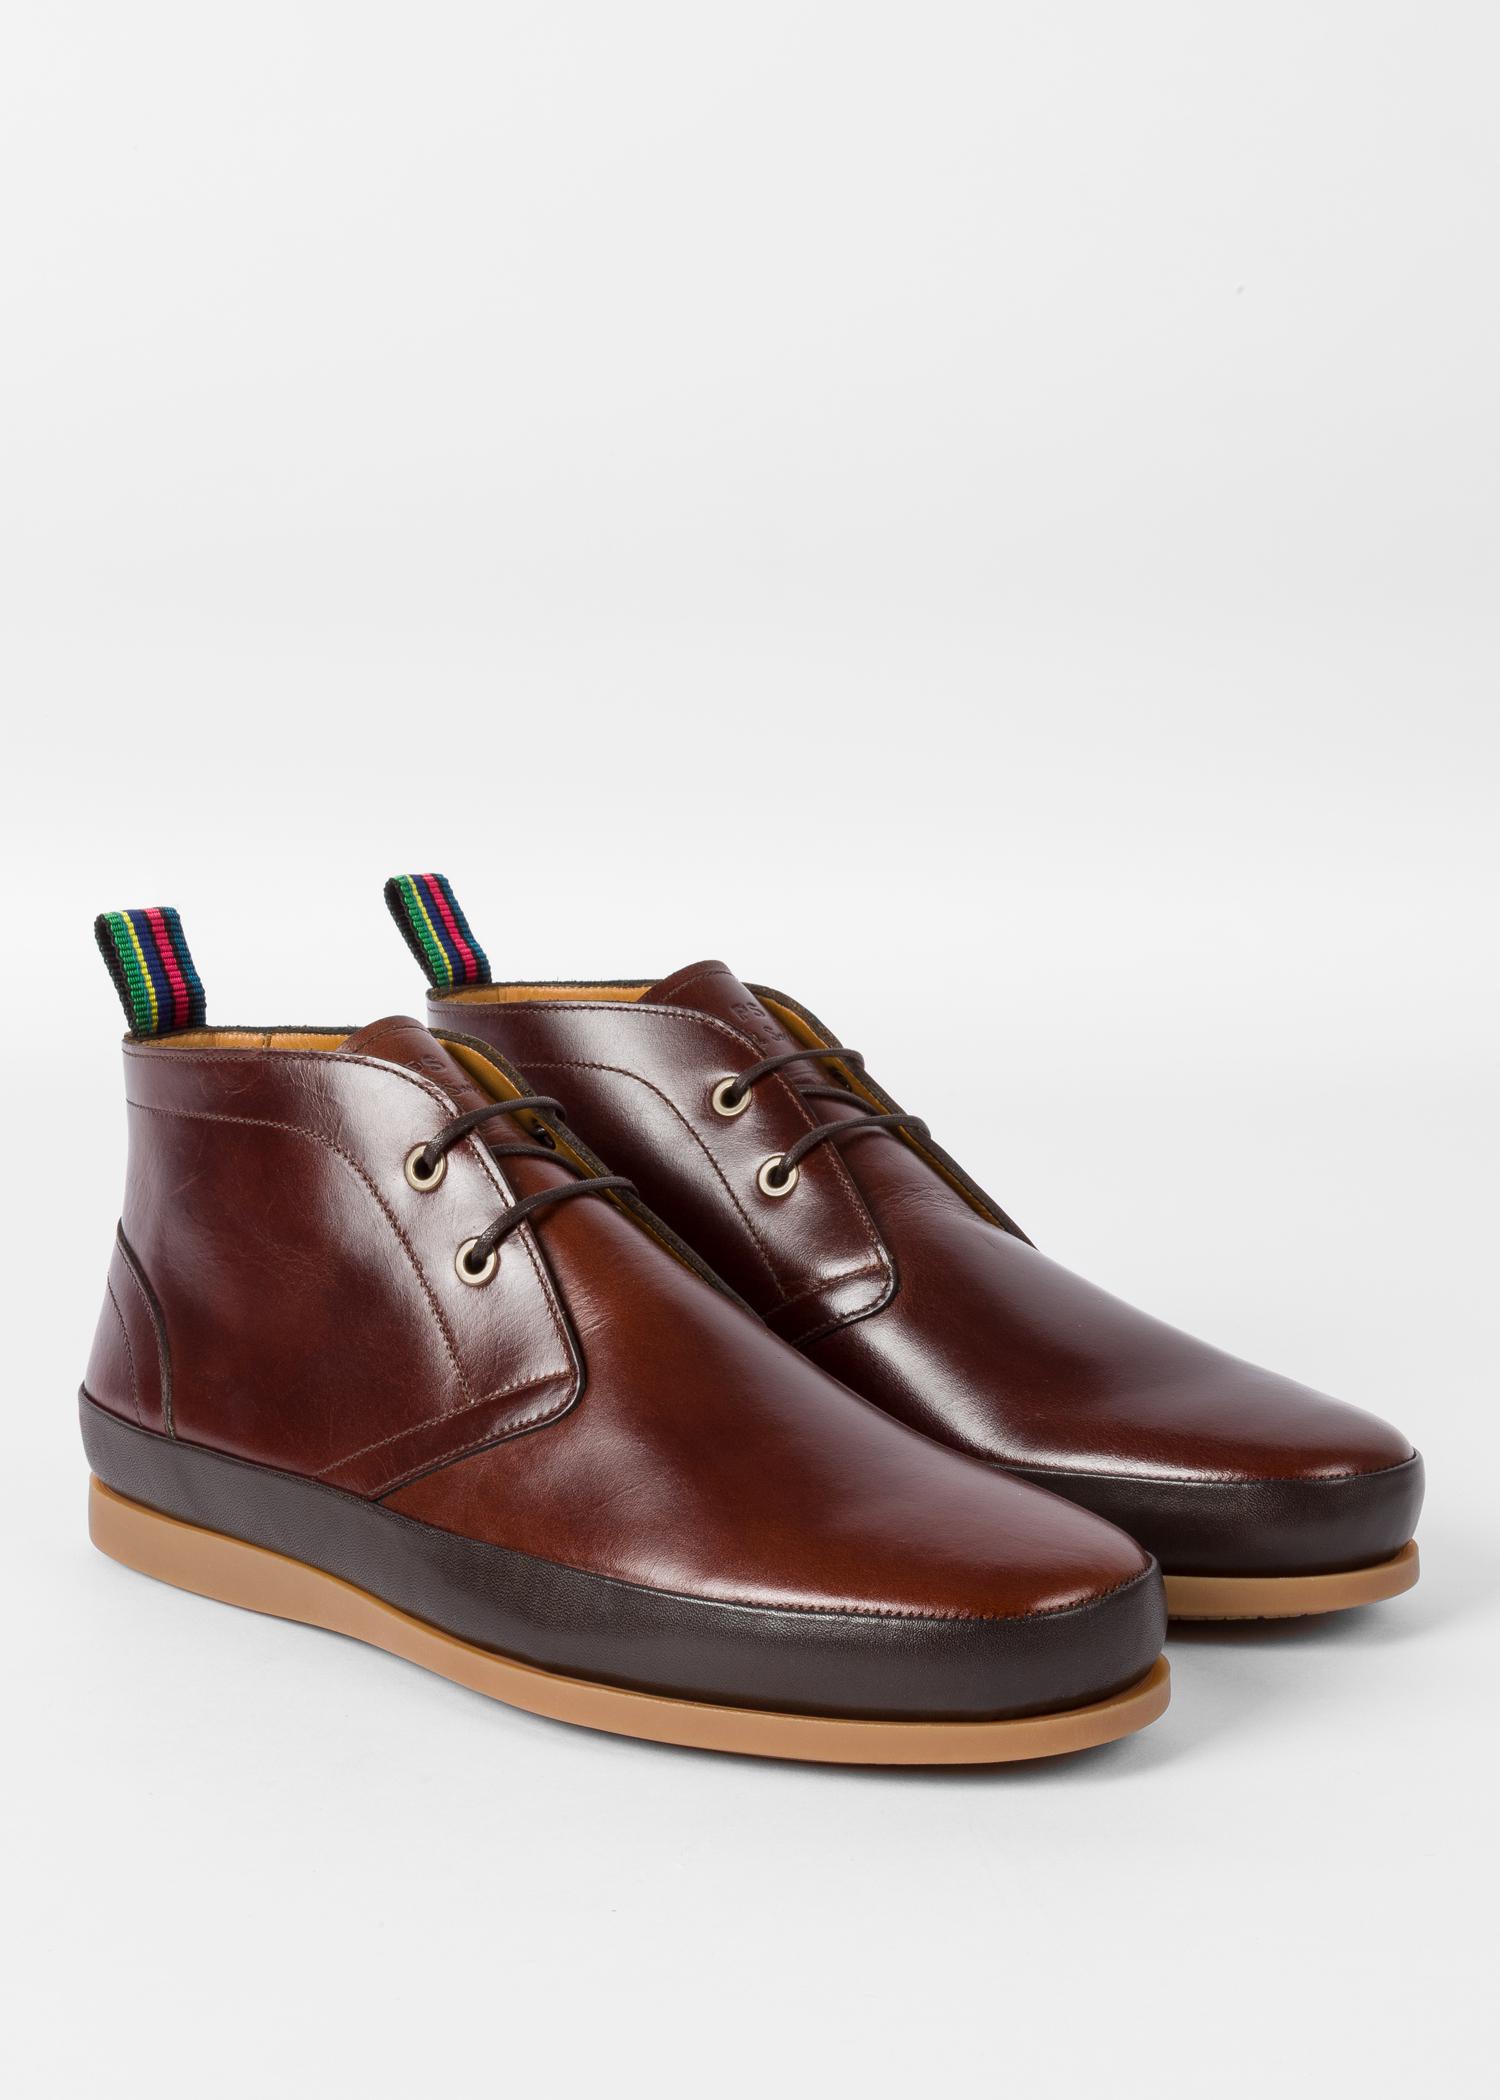 Paul Smith Bottines Homme Online, SAVE 51%.